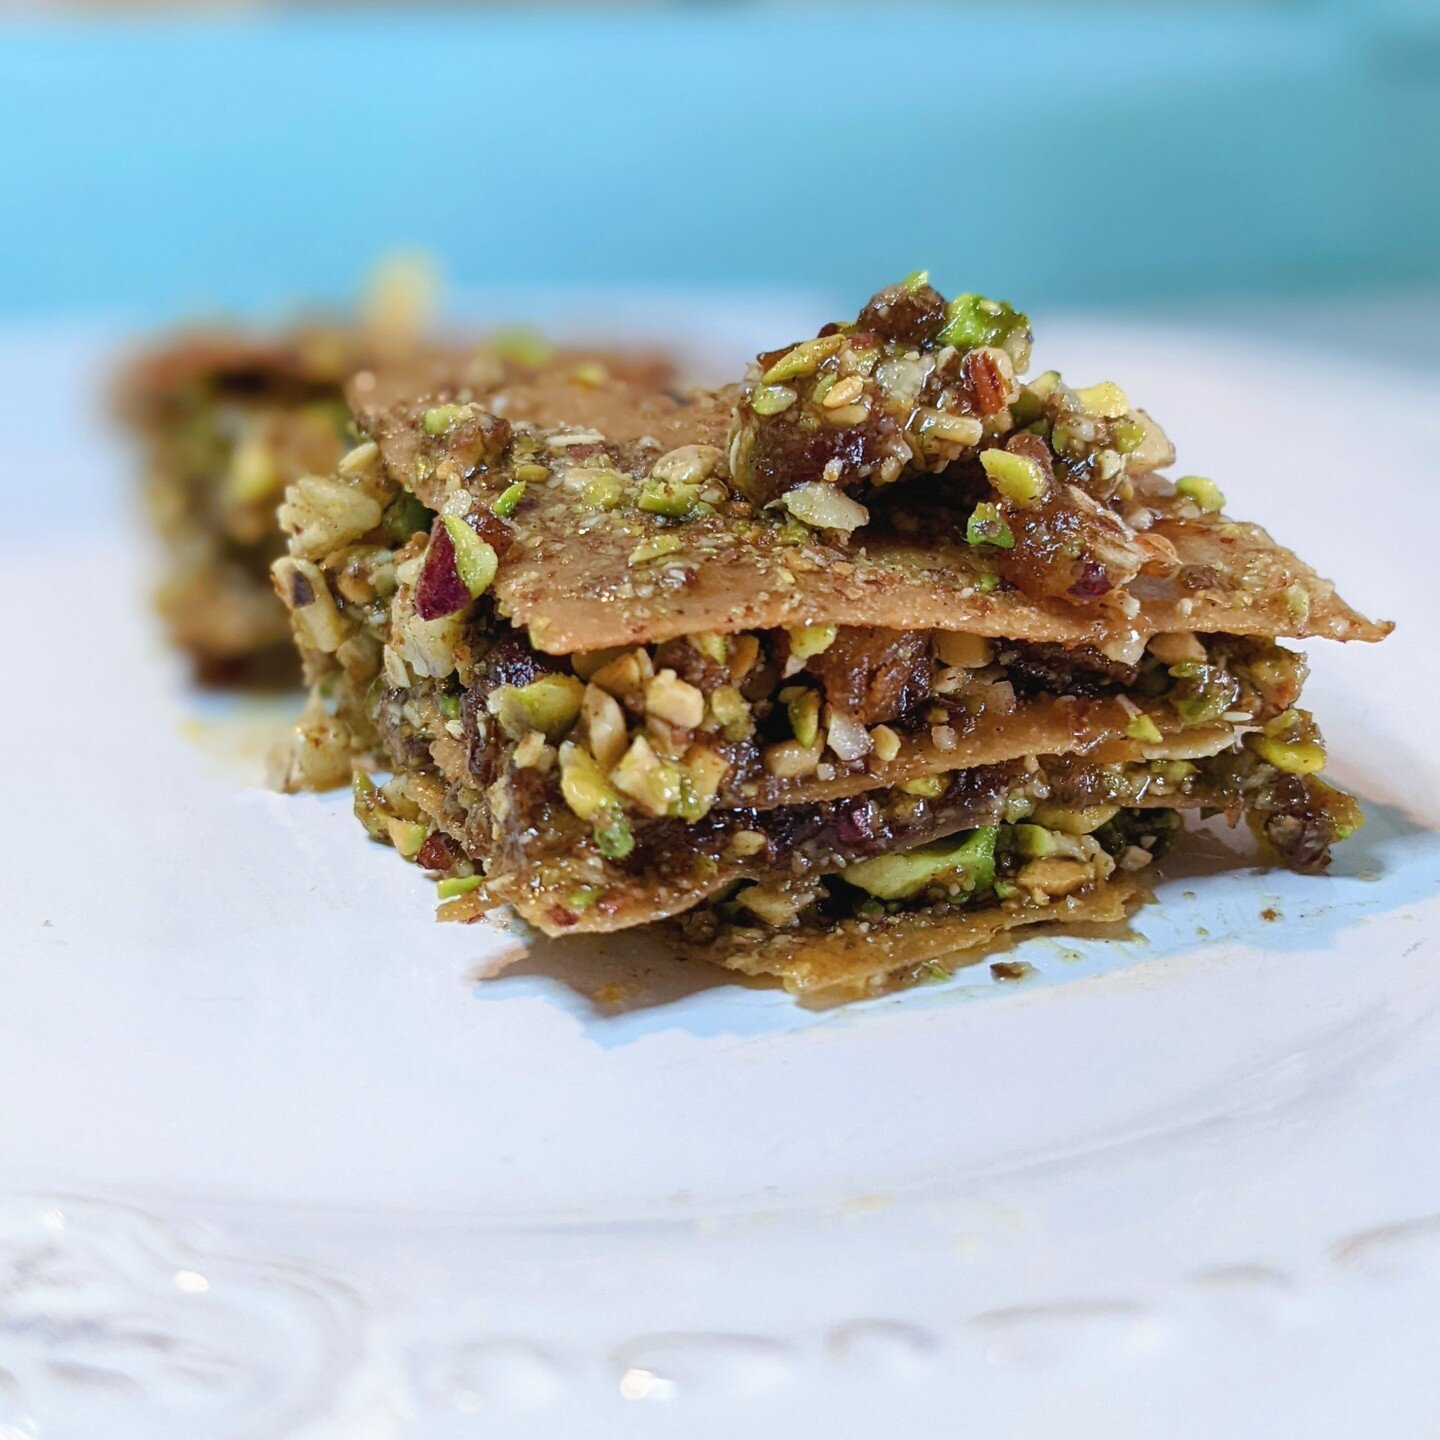 Today's celebratory dessert was an SCD baklava made with coconut wraps, pistachio, almonds, hazelnuts &amp; dates. 

This is an example of me getting creative in the kitchen with delicious results. As a child &amp; young woman I really enjoyed baklav